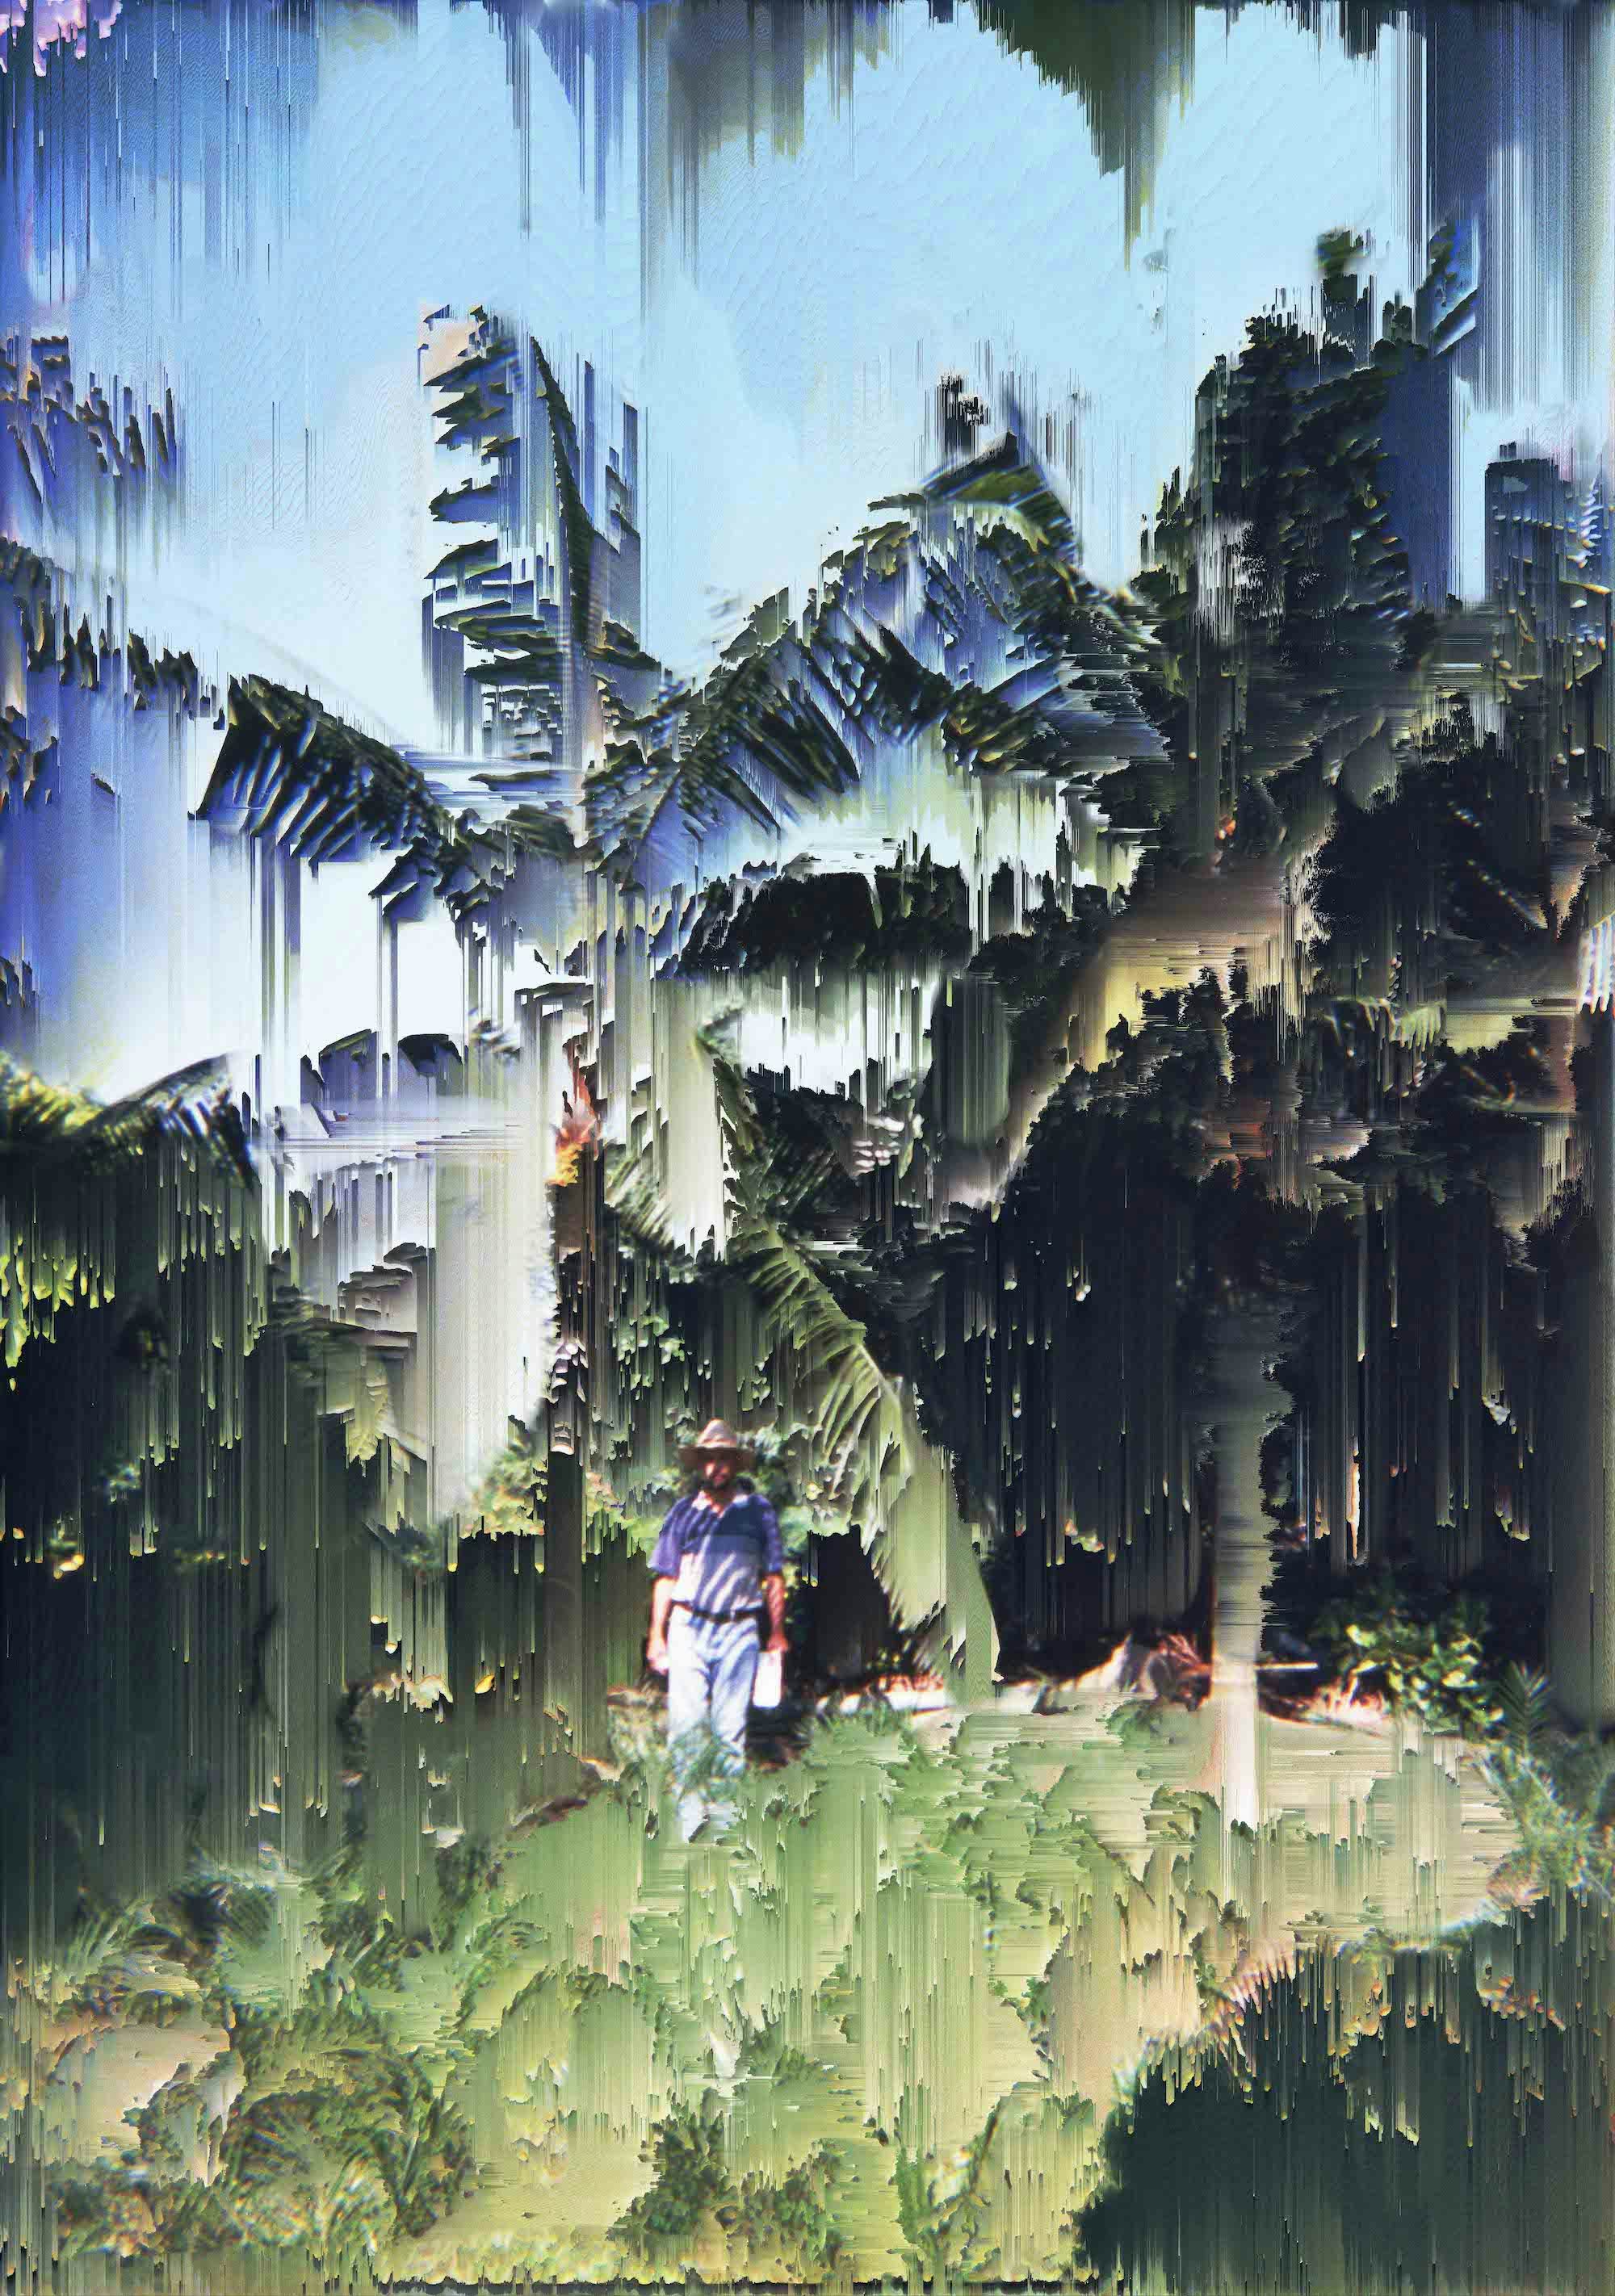 Archival image of artist's father in a palm tree garden. The pixels are manipulated, appearing the photograph to melt© Cristóbal Ascencio Ramos